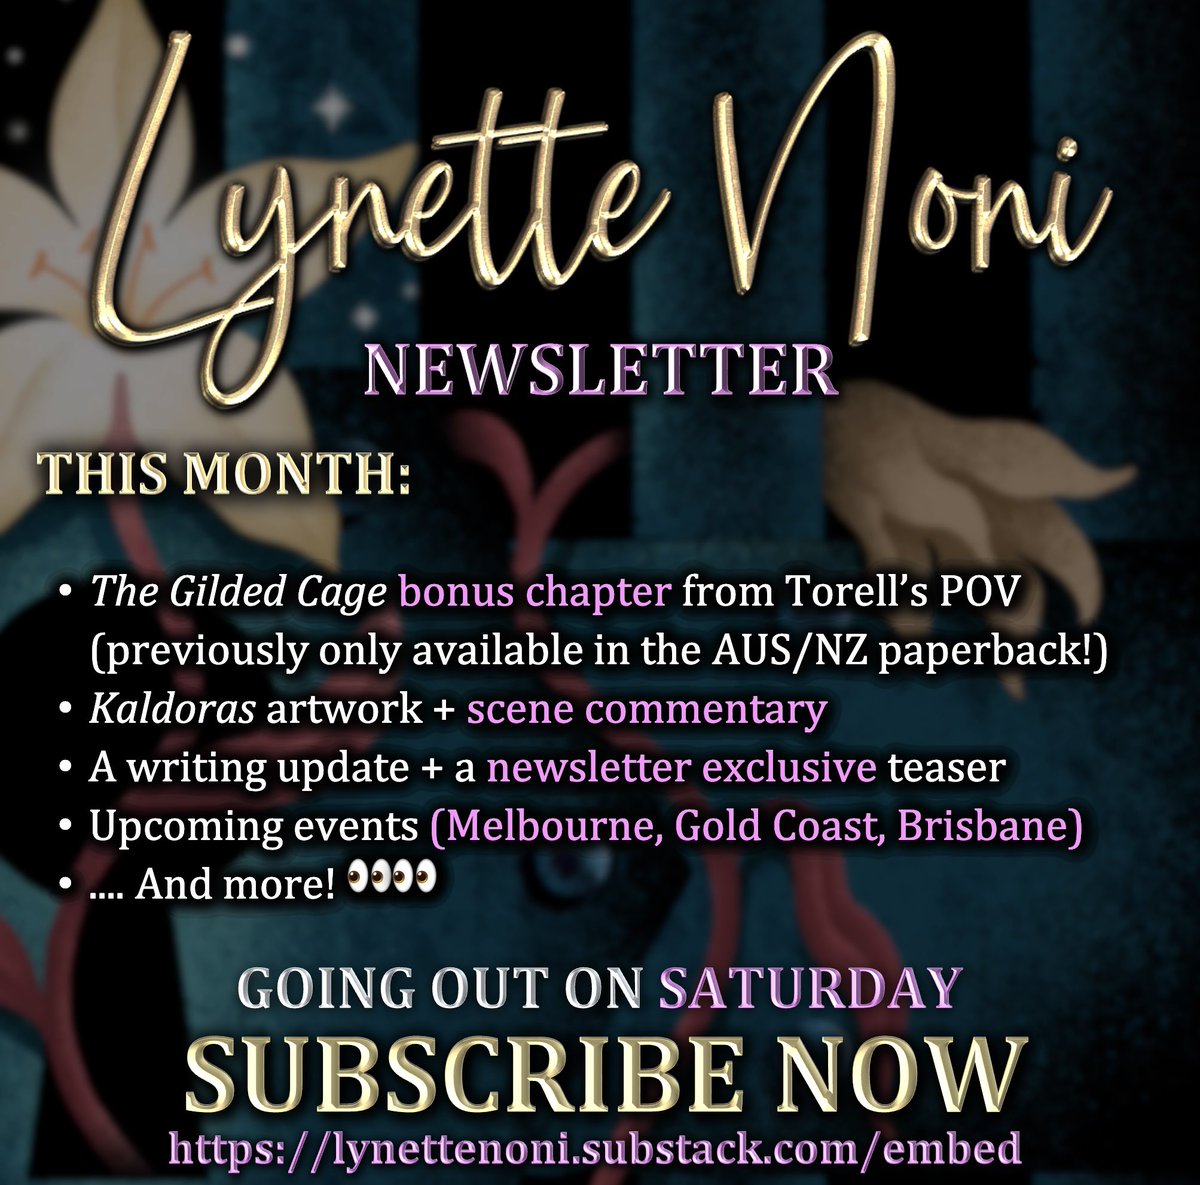 Lots of fun stuff in my next newsletter, which is going out THIS SATURDAY! Sign up to keep from missing out: lynettenoni.substack.com/embed